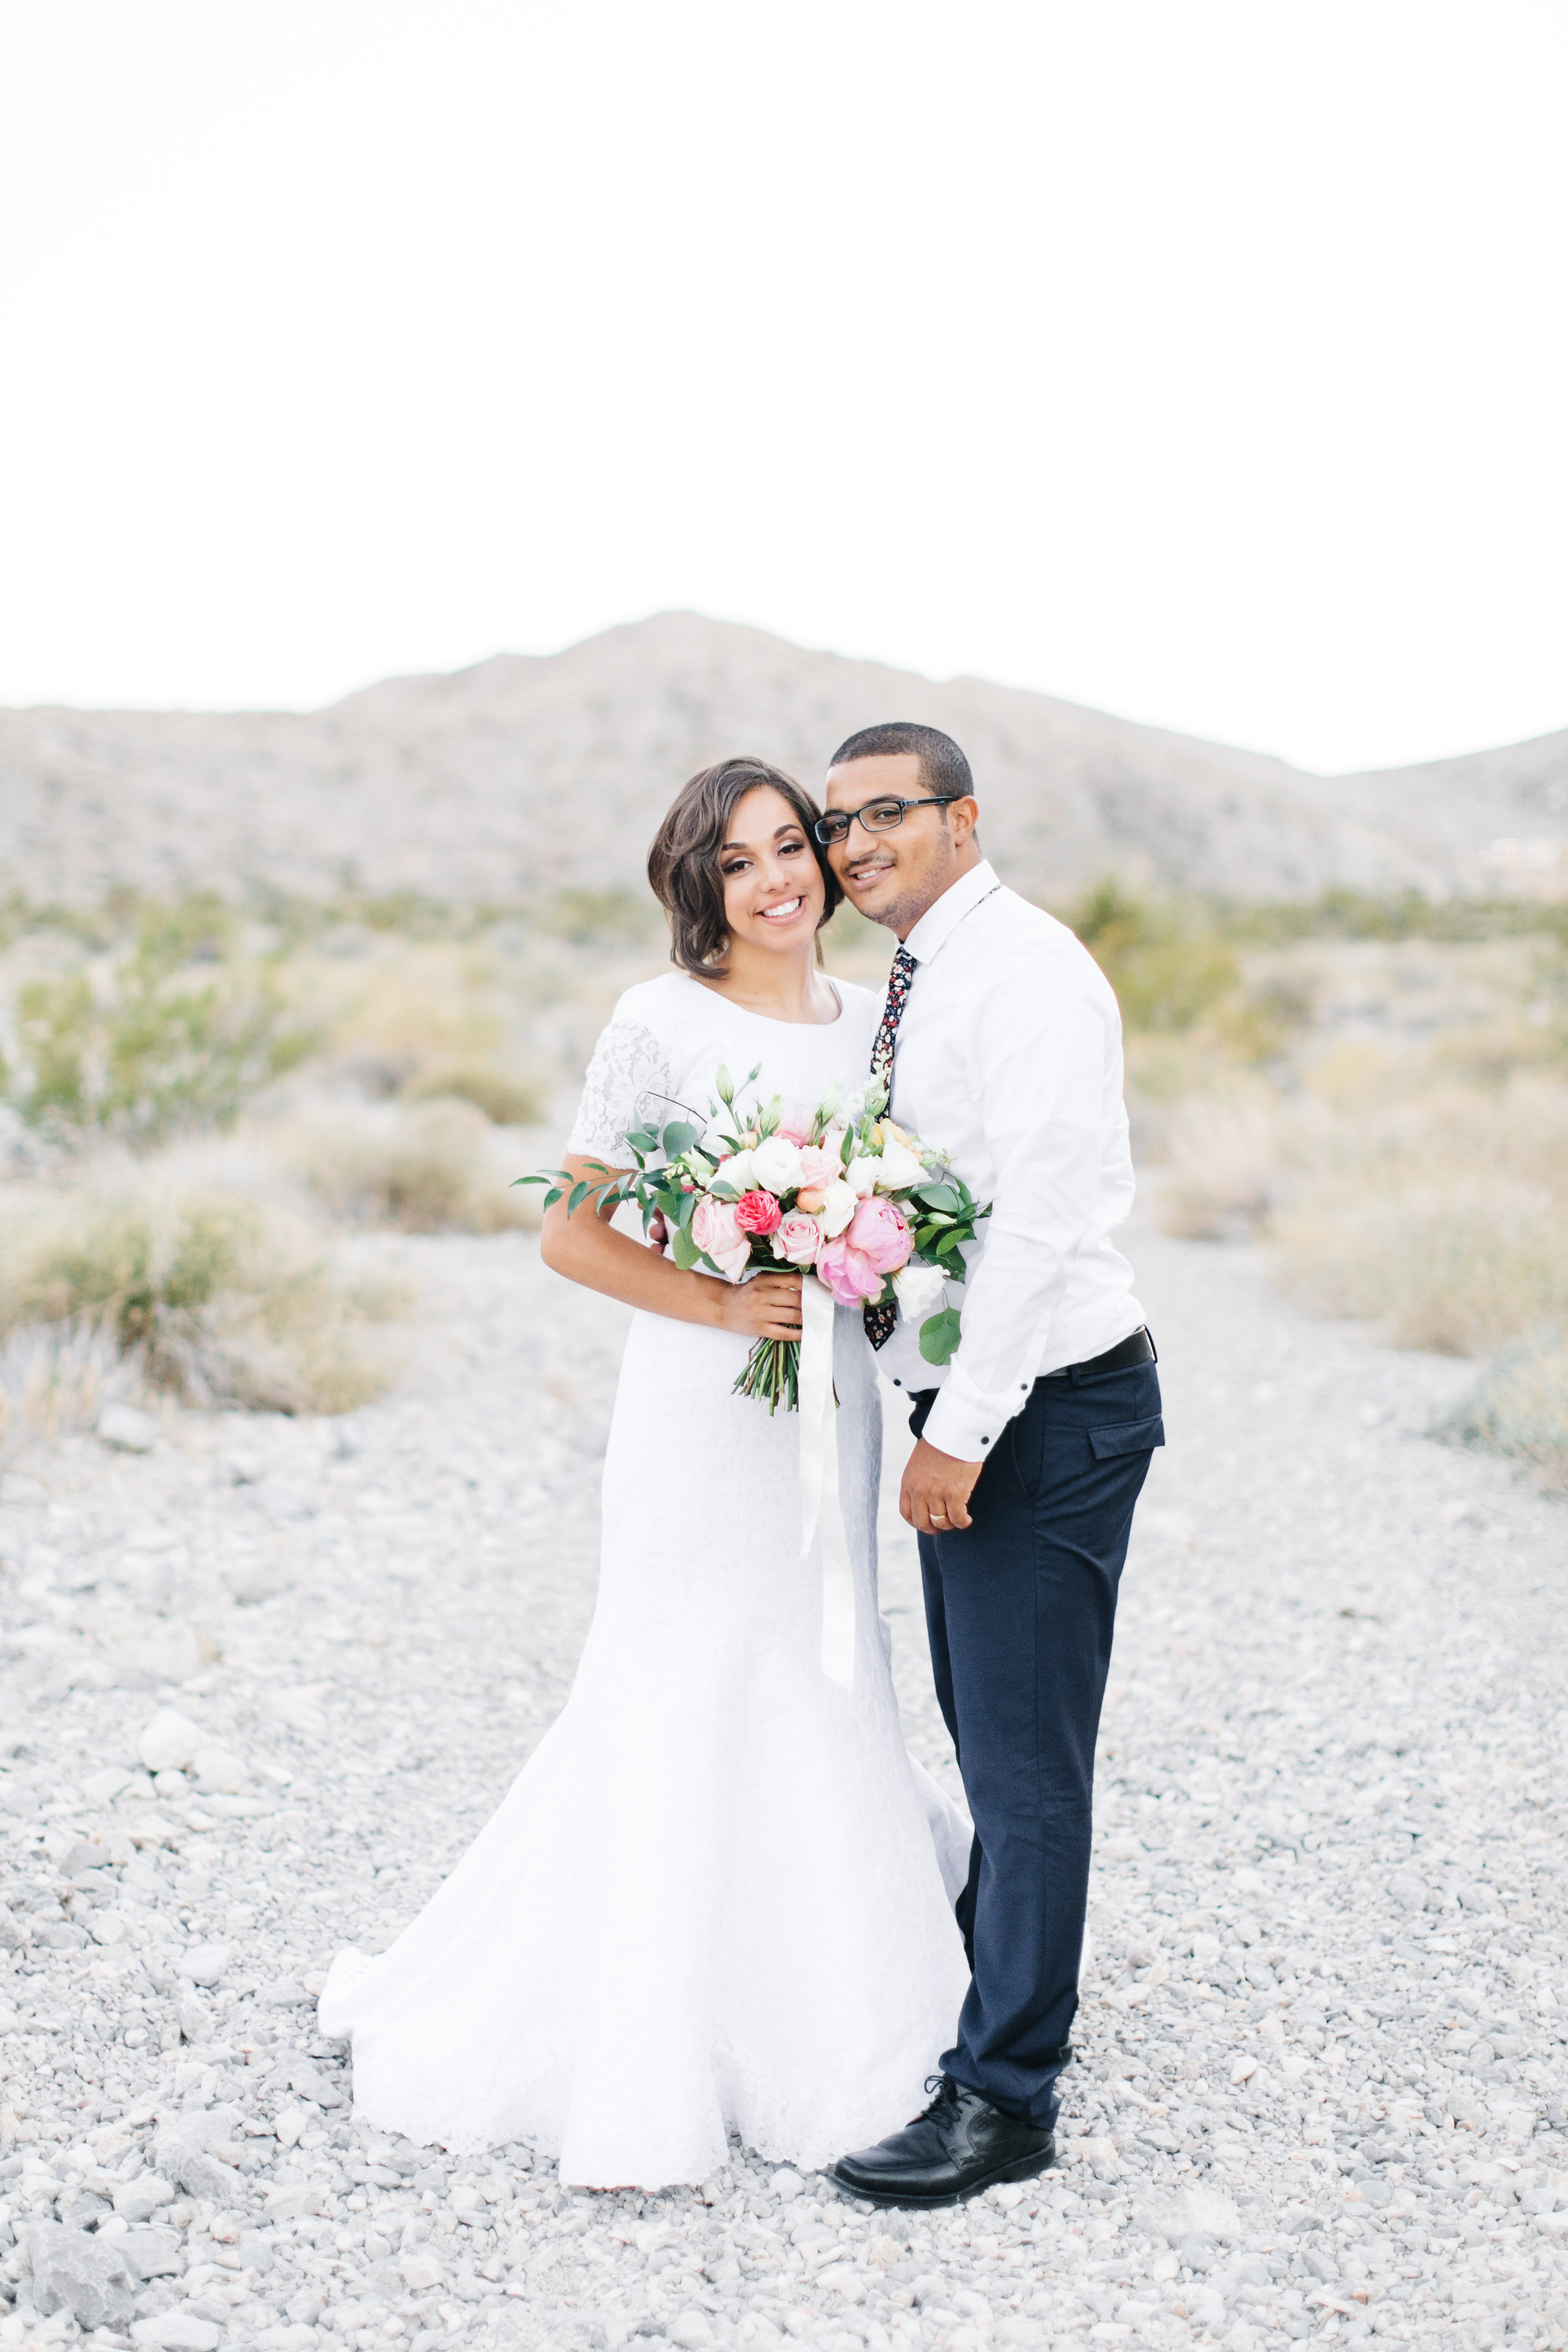 A Sweet Styled Shoot At Ethel Ms Chocolate Factory Las Vegas - Black Nuptials